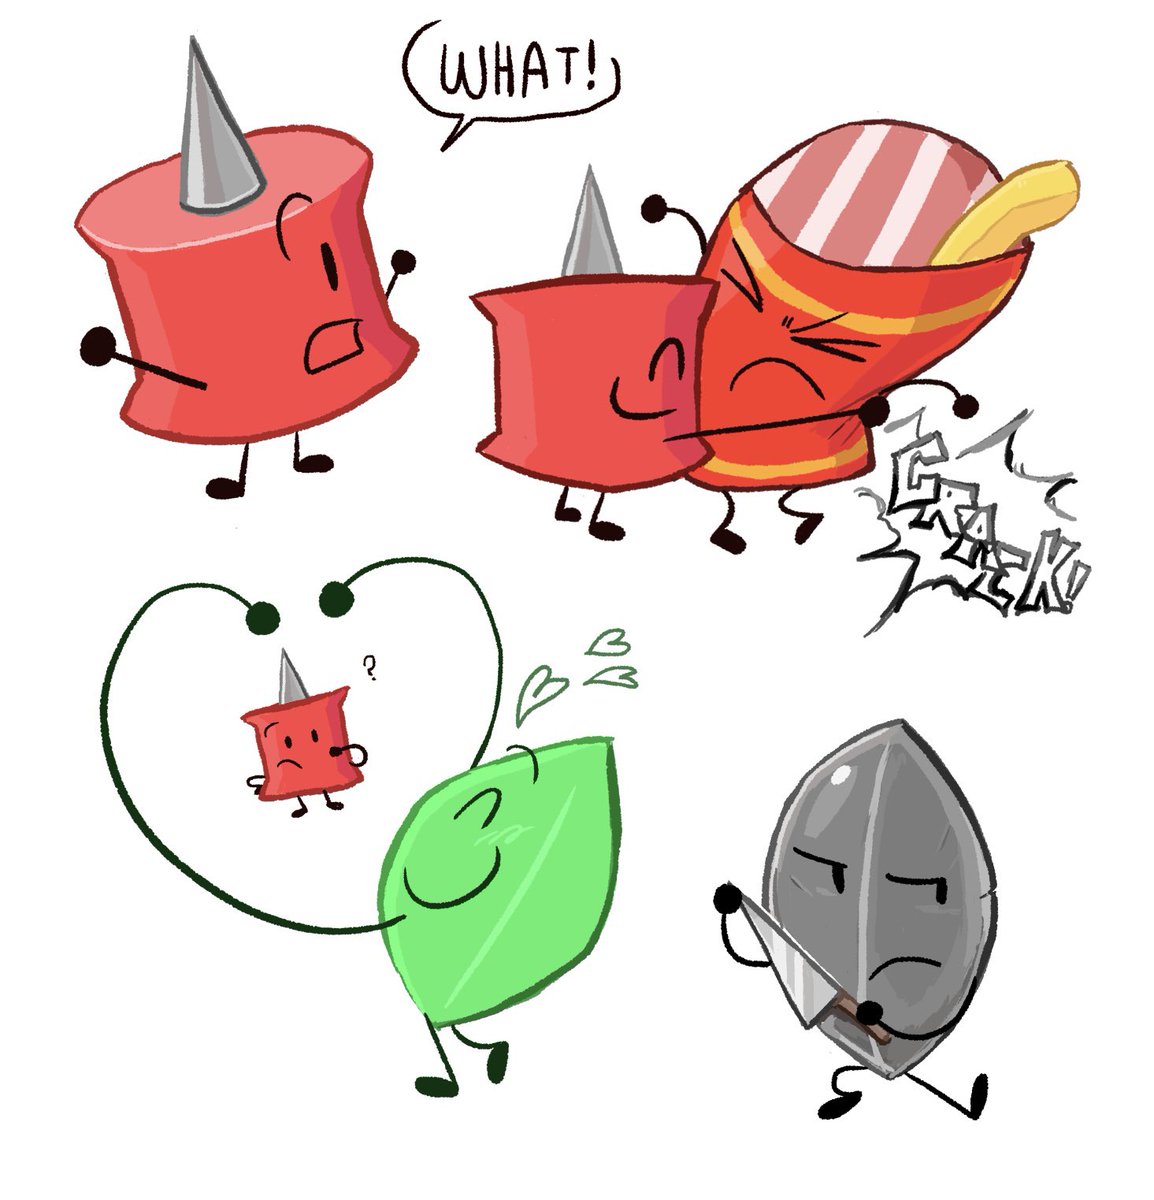 What that’s crazy 

#bfdi #bfdia #idfb